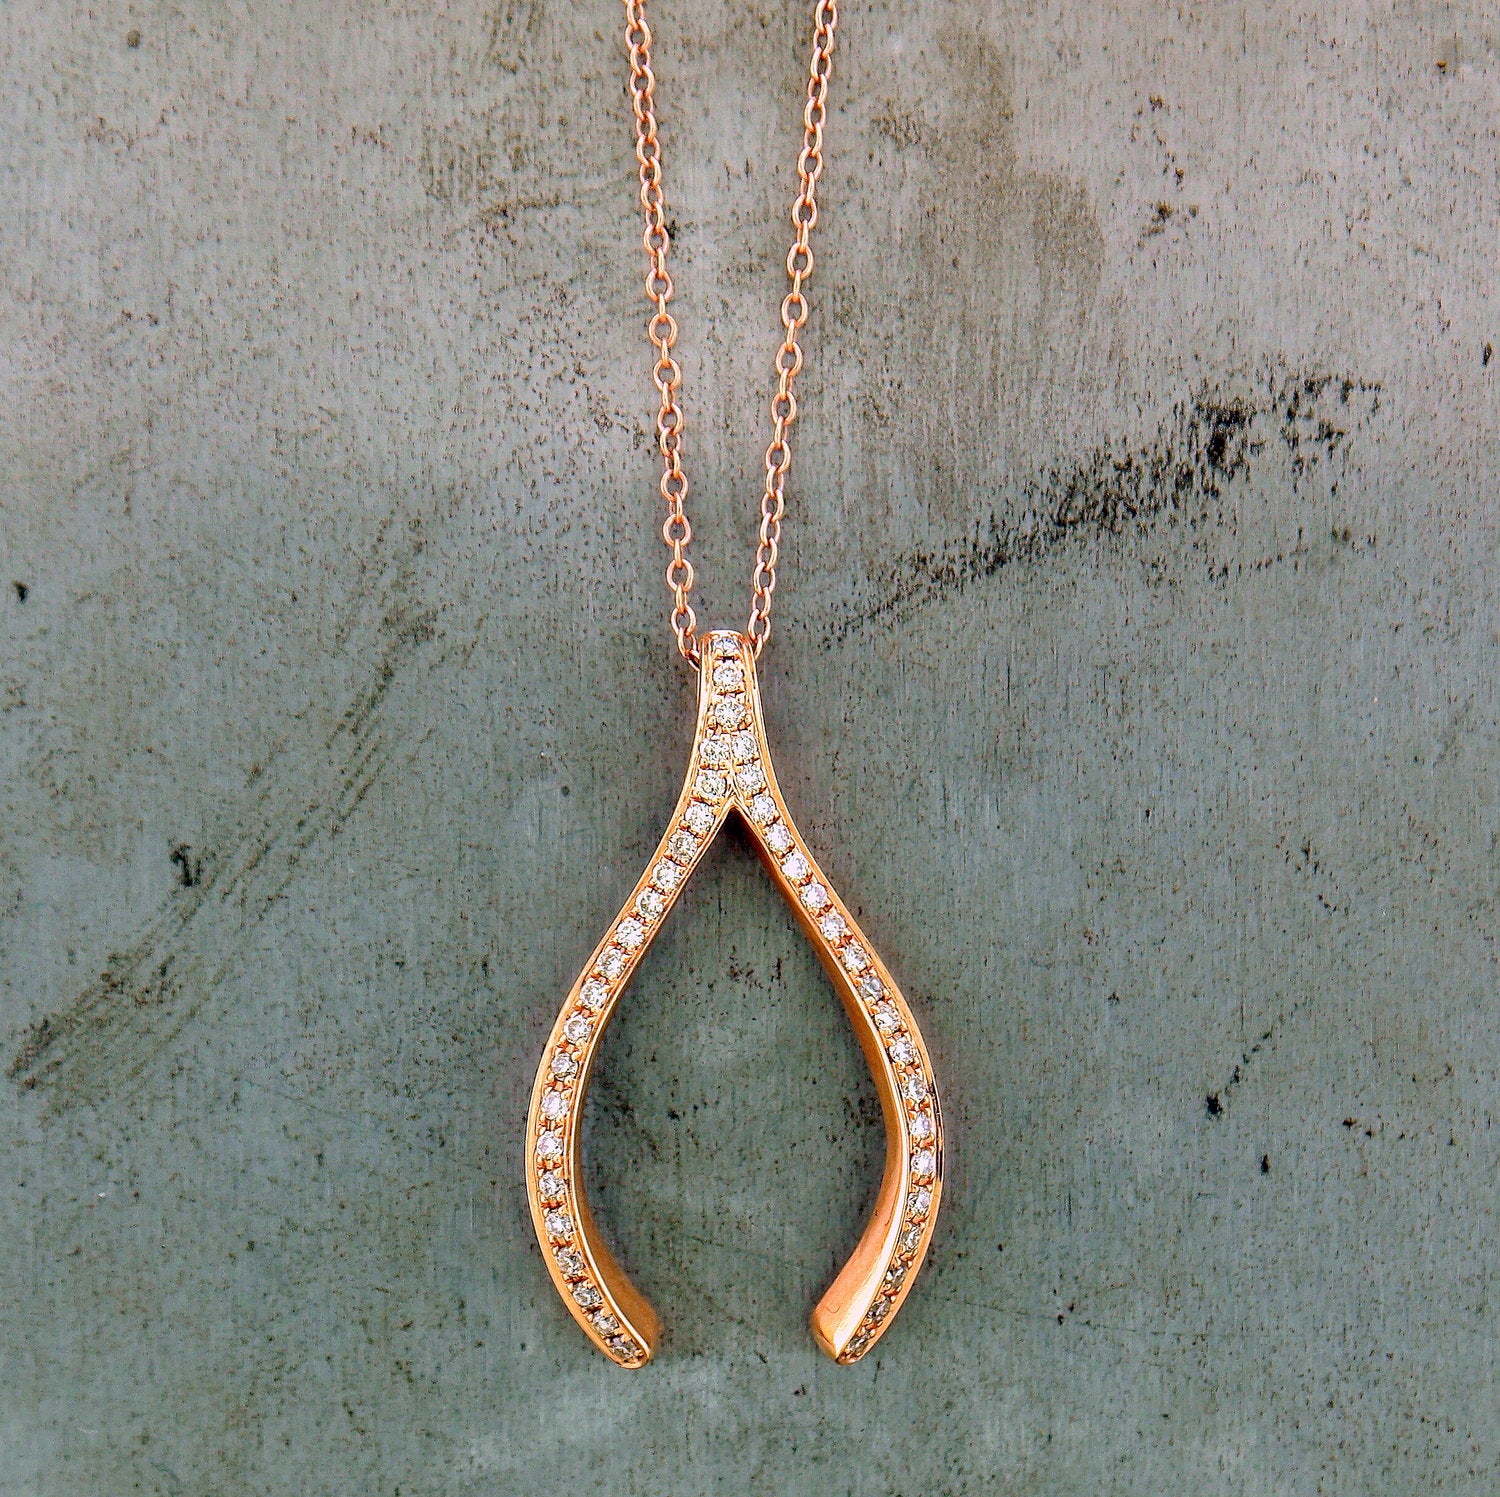 14 karat rose gold pendant in the shape of a wishbone. The tail end of the wishbone acts as the bail of the pendant. Covering the face of the wishbone are pave set round brilliant diamonds. There is only one row of diamonds on the face of the wishbone. The pendant lays on a 14 karat rose gold curb chain. This pendant lays on a gray background.